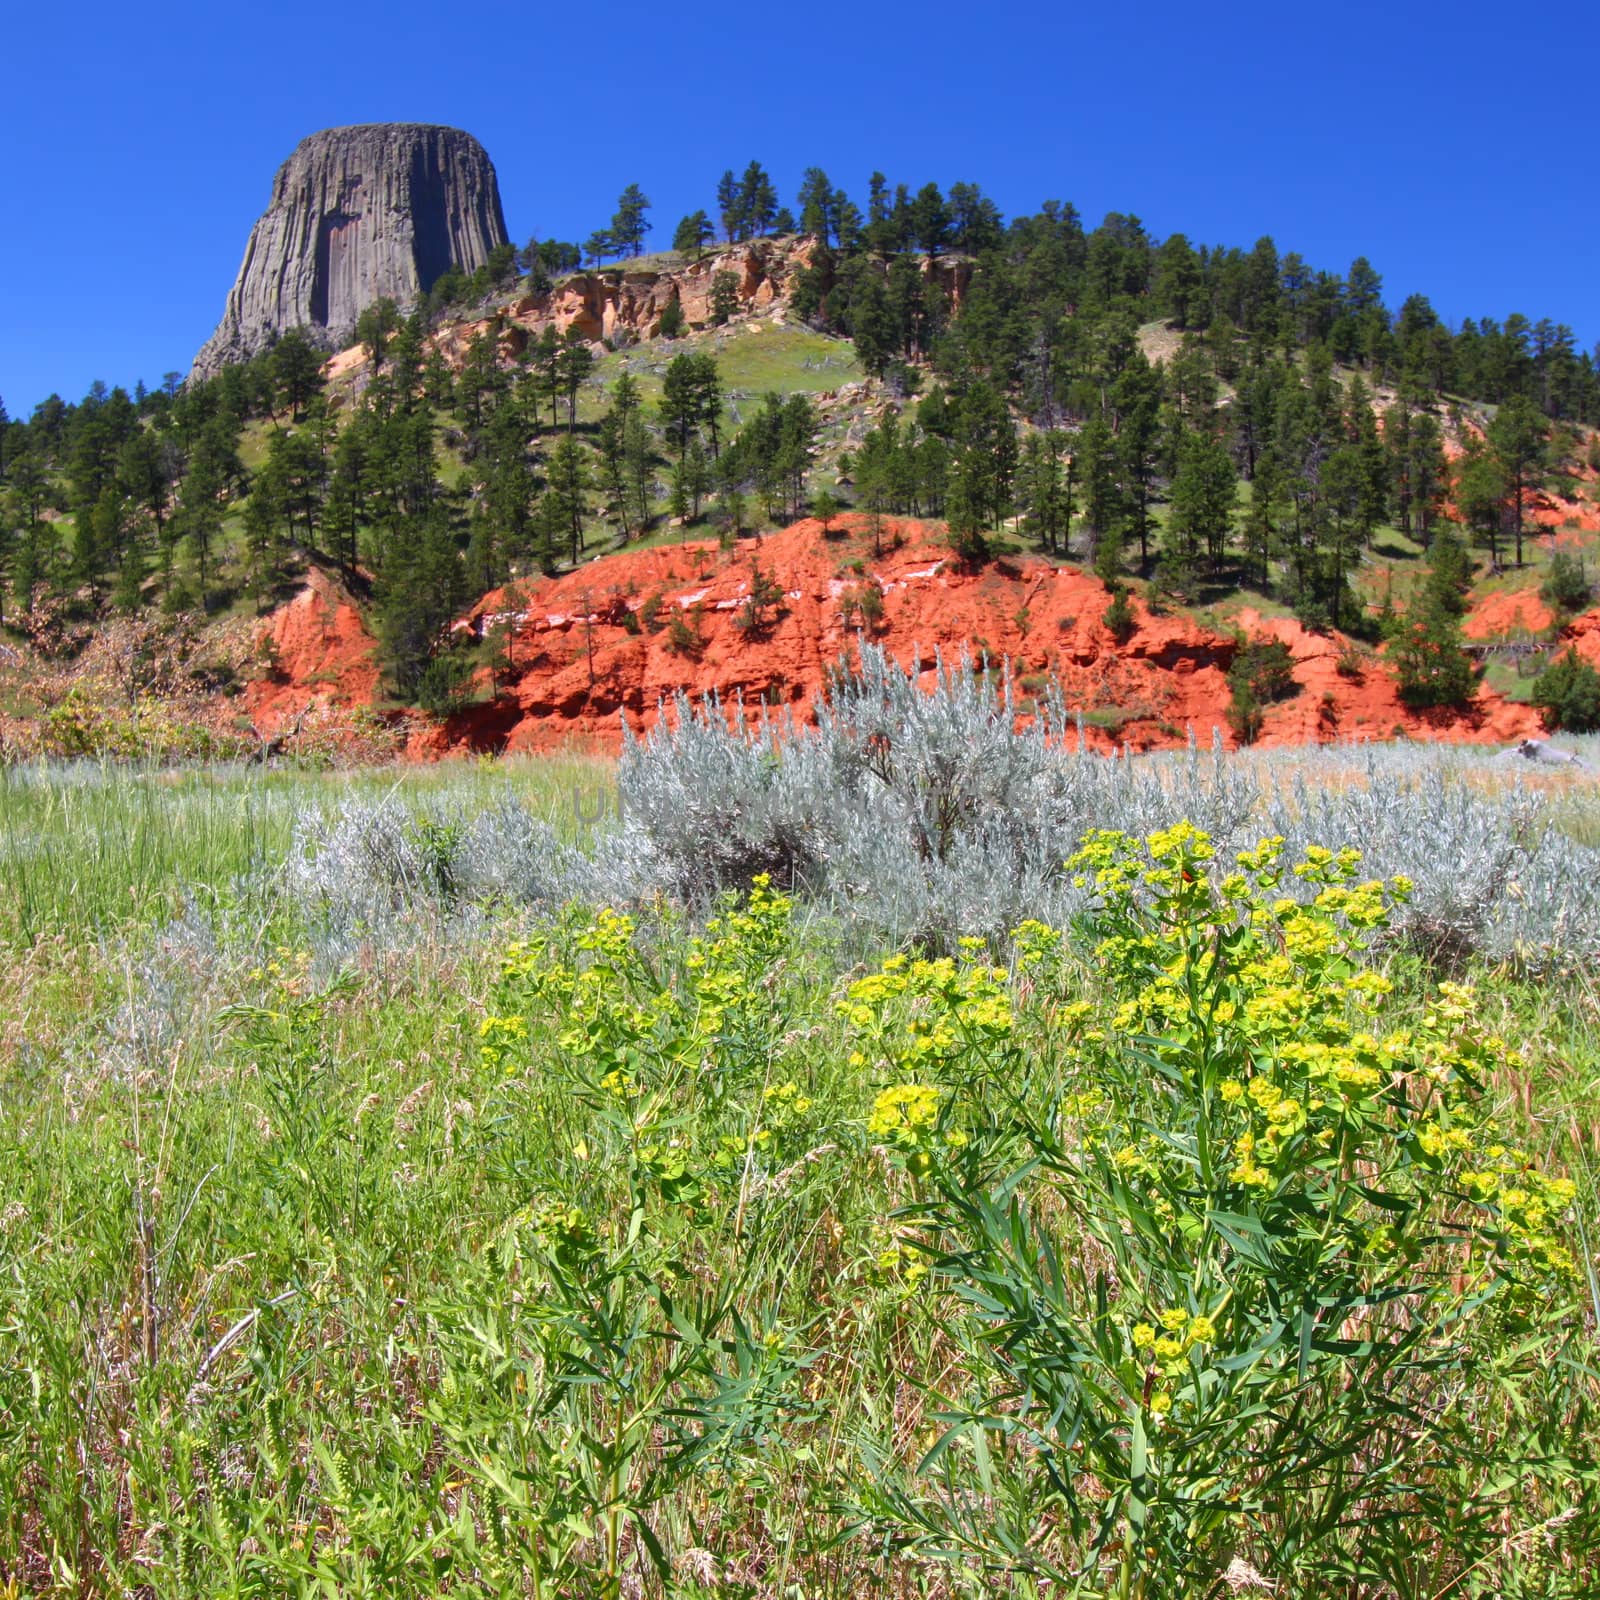 Devils Tower National Monument rises over a field of flowers in Wyoming.